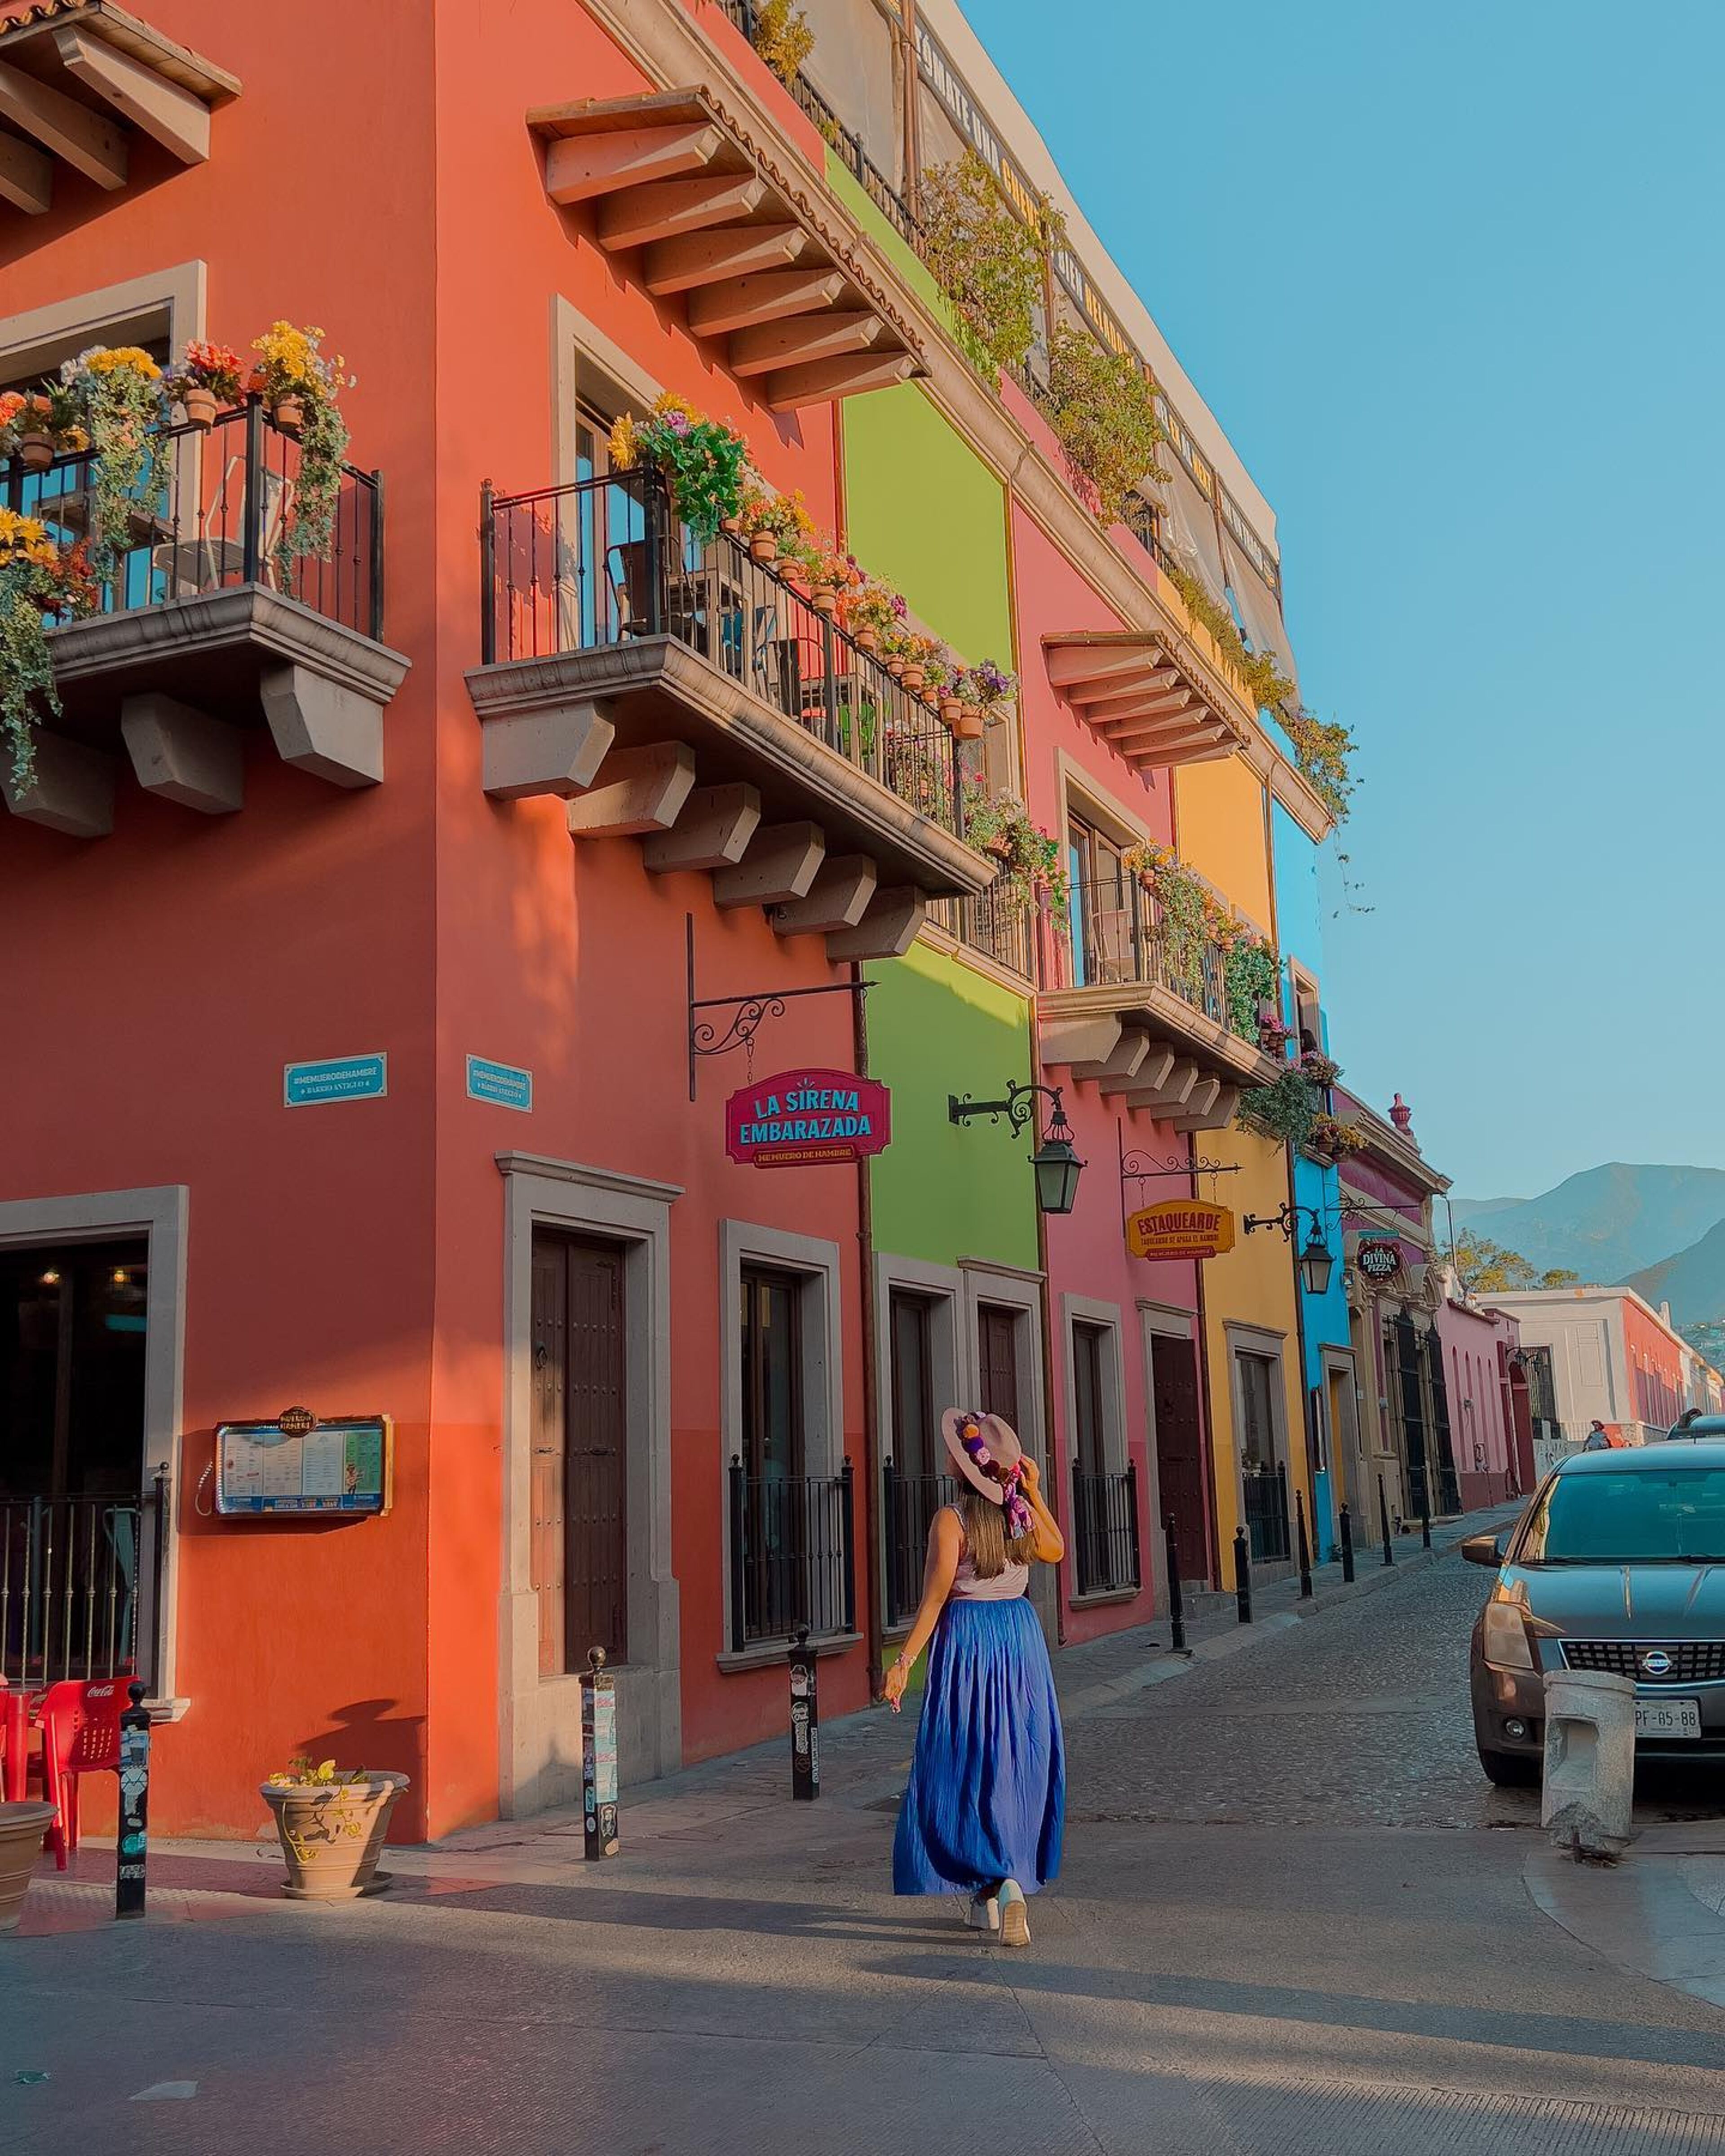 A woman in a blue skirt and hat walks down a vibrant street lined with colonial buildings in the warm glow of the late afternoon sun.

